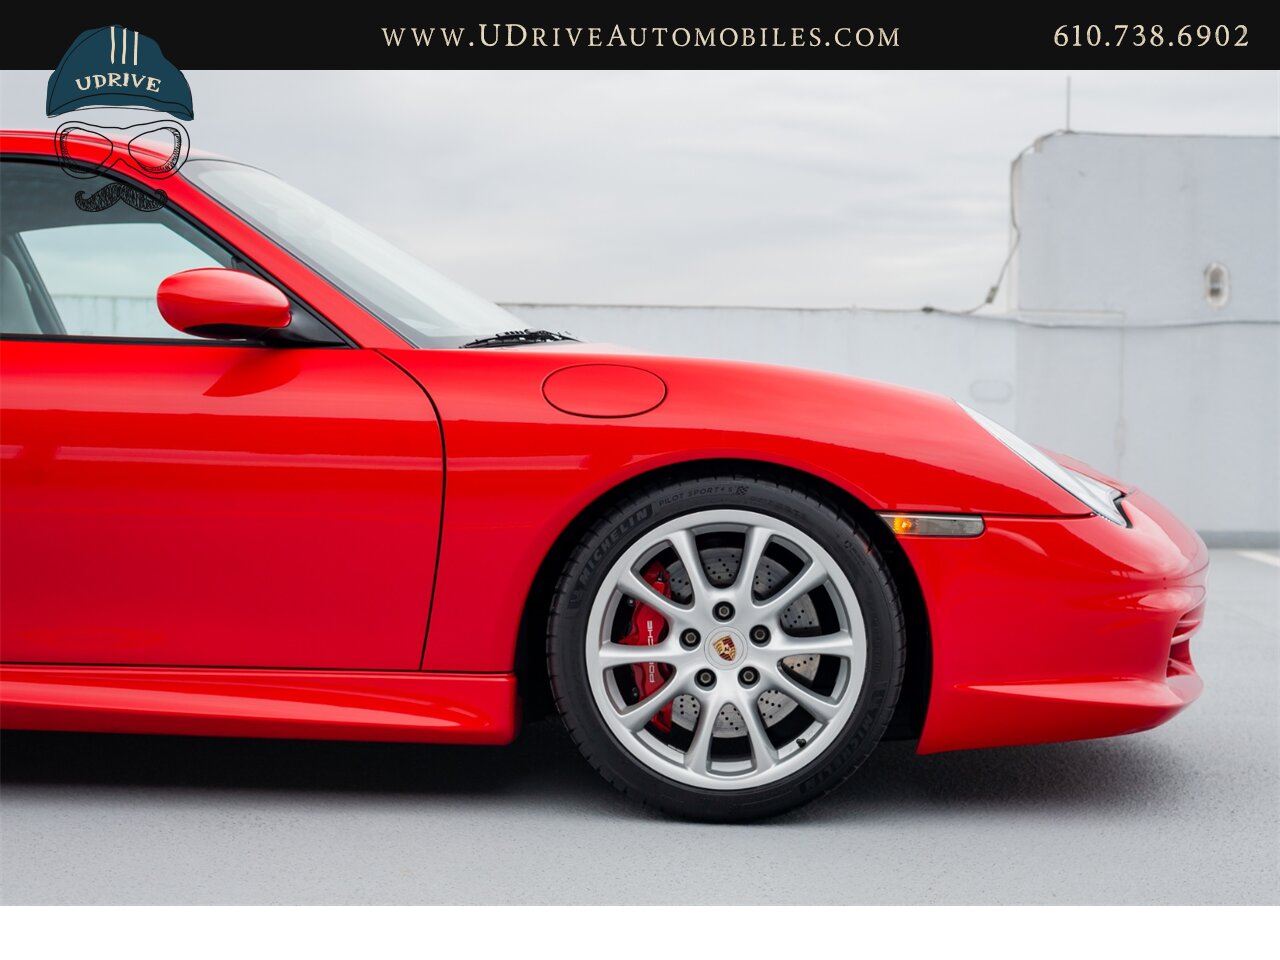 2004 Porsche 911 996 GT3 Guards Red Sport Seats Painted Hardbacks  Painted Center Console 18k Miles - Photo 18 - West Chester, PA 19382